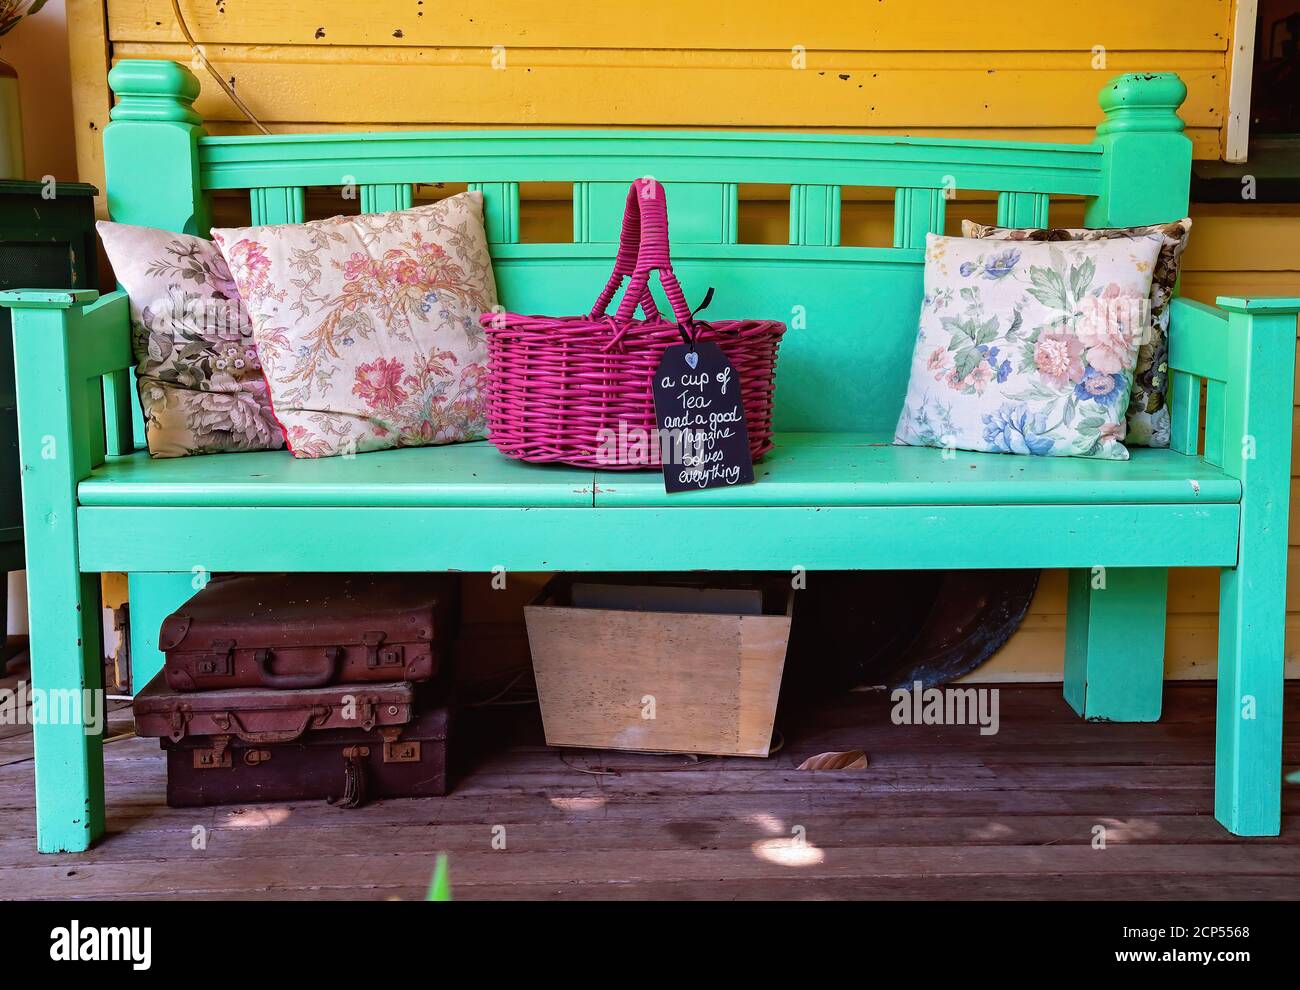 A painted timber bench stacked with cushions and a basket with briefcases and a box underneath including a cute handwritten sign all old fashioned Stock Photo